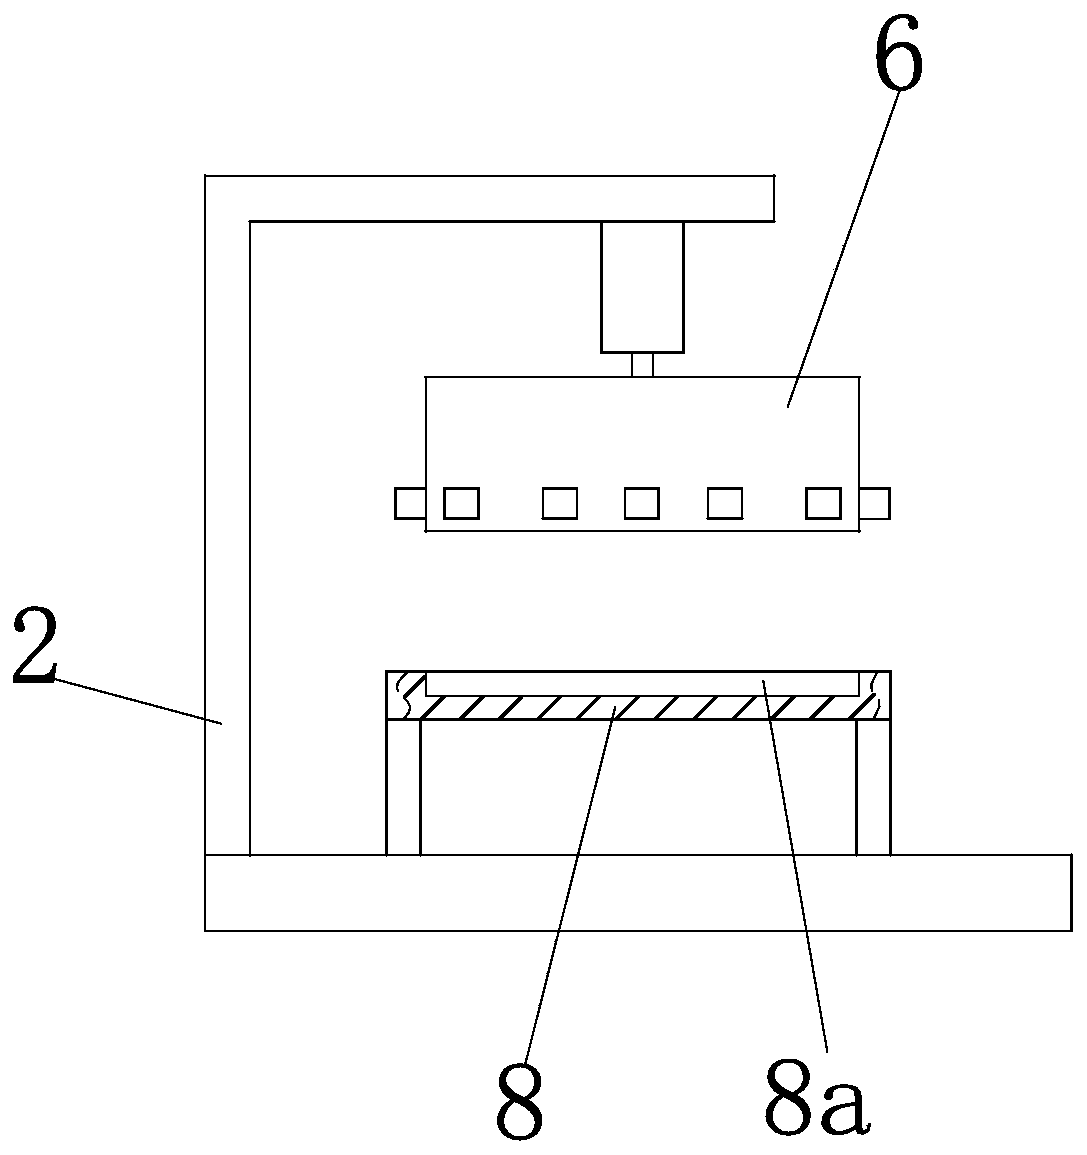 Implementation device of a bed surface wrapping device